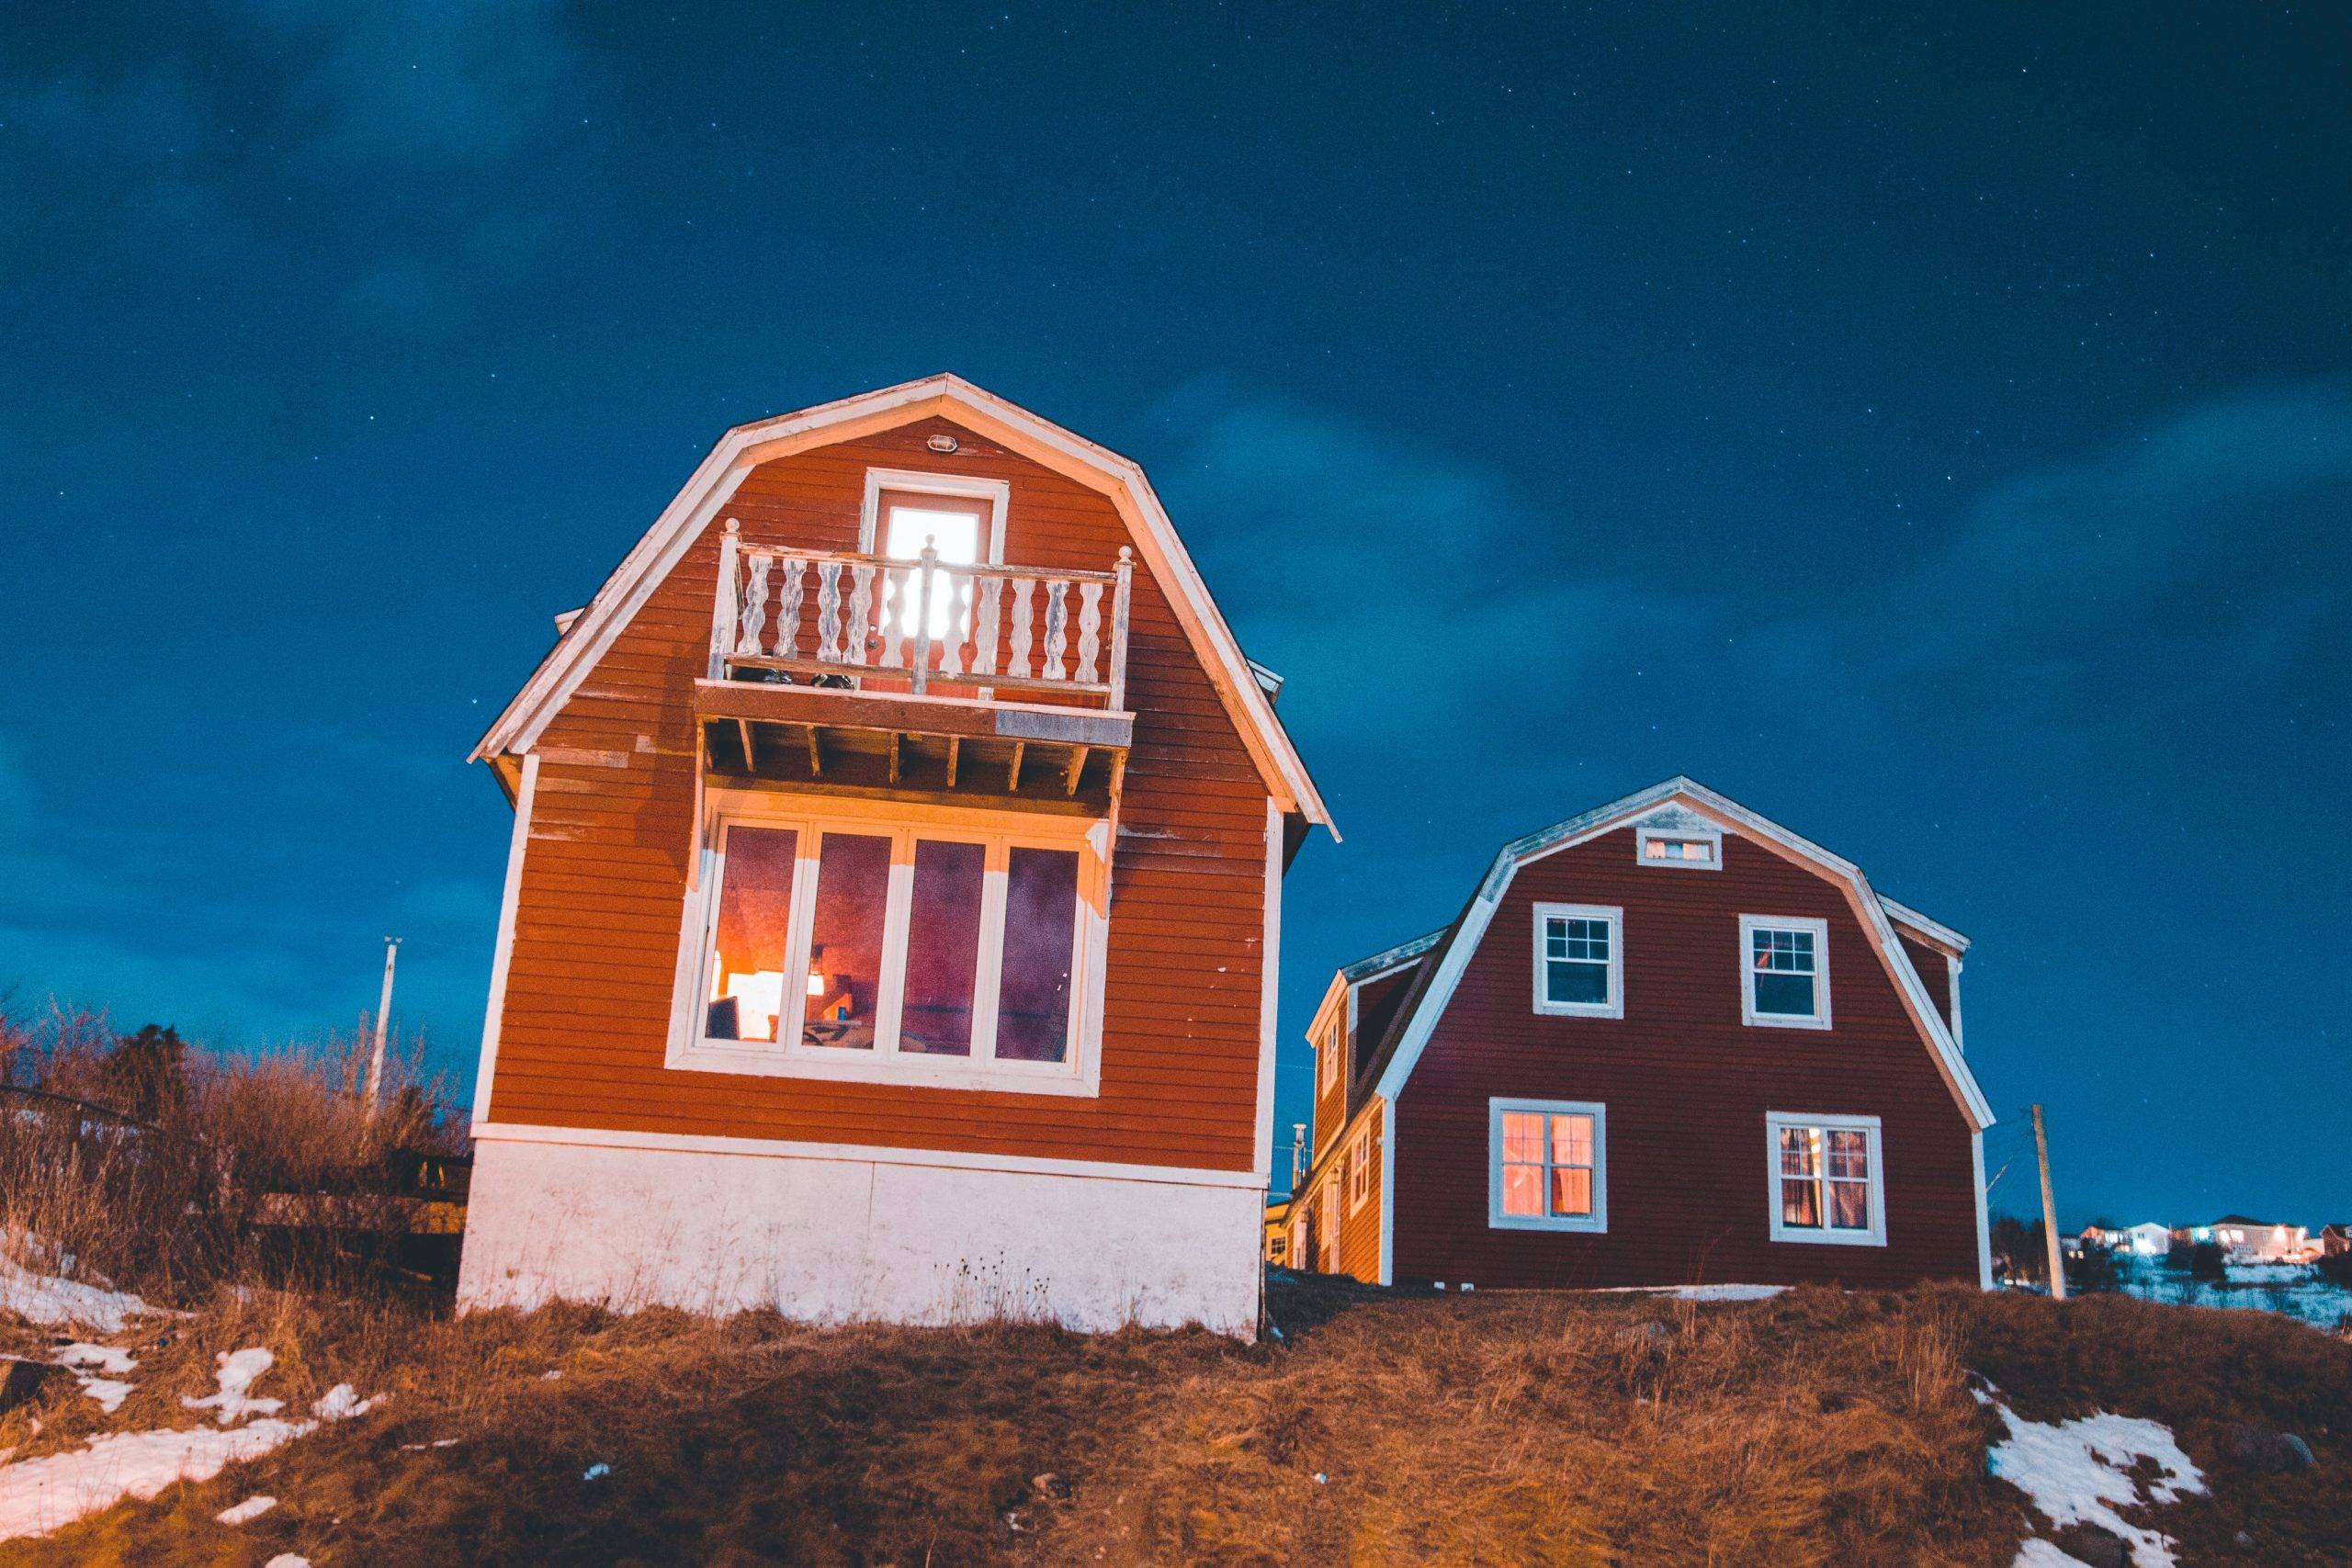 The best ways to spend time indoors - houses in Scandinavia at night